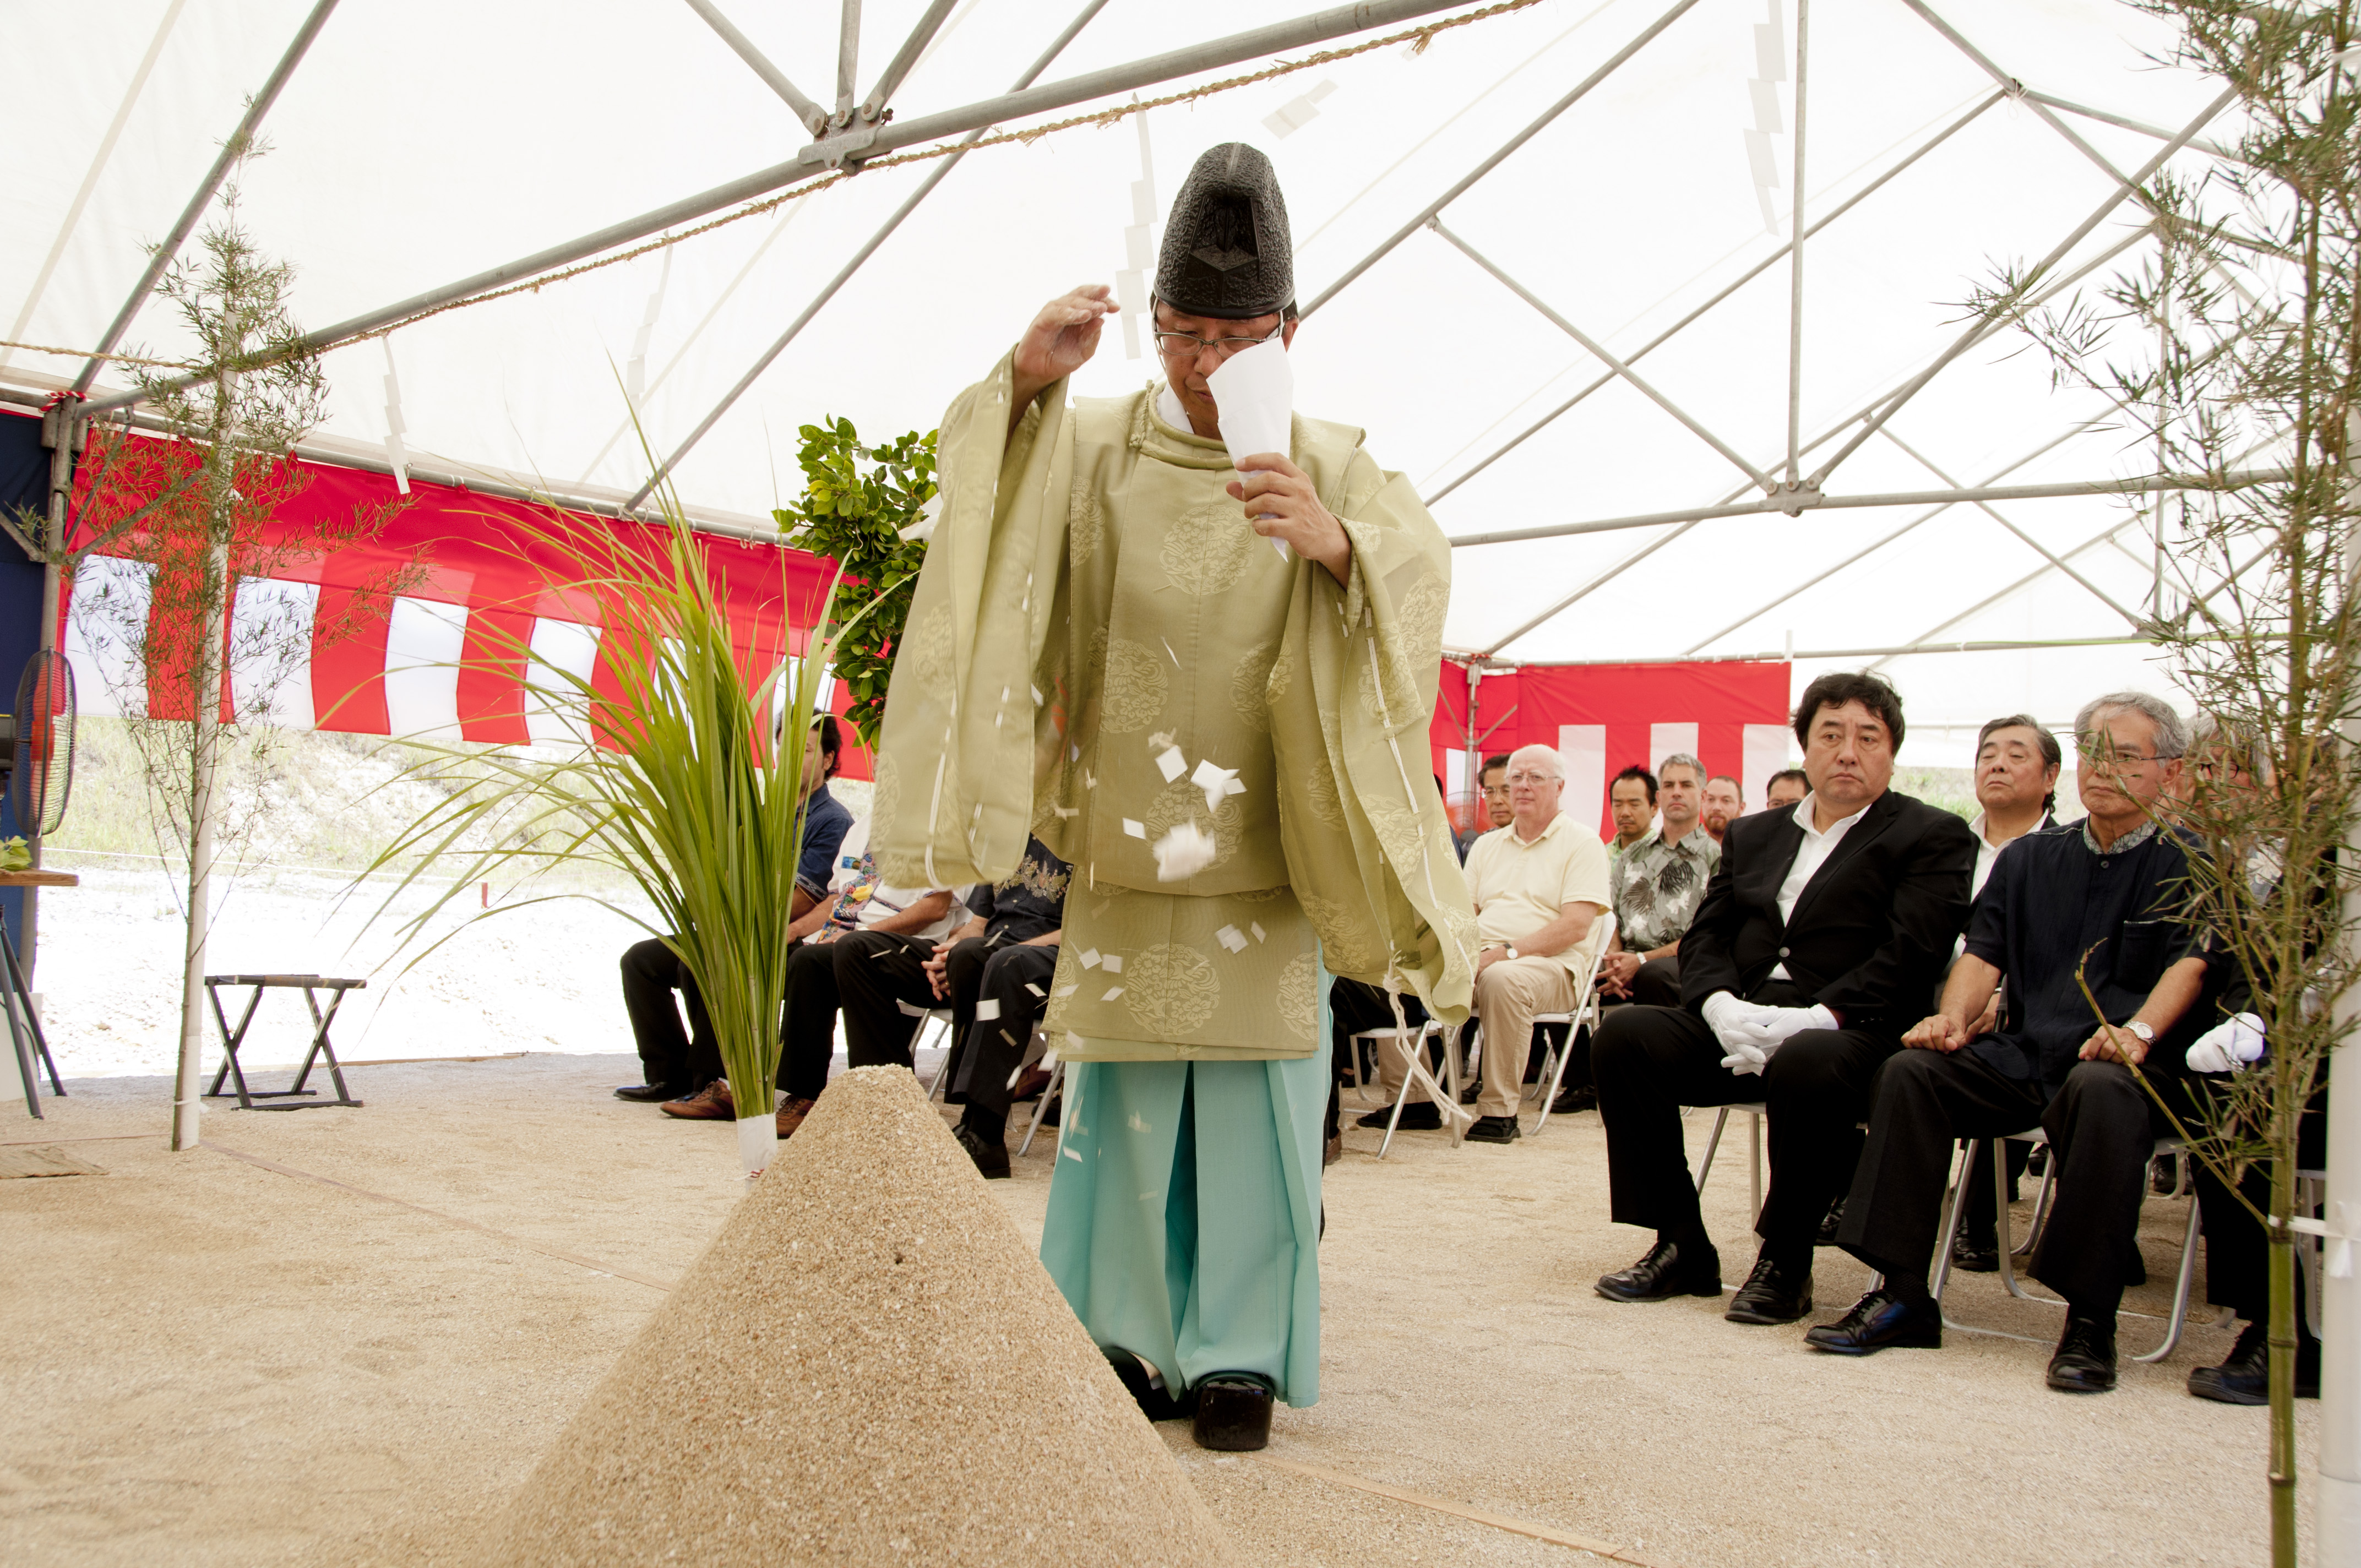 The Kannushi (Shinto Priest) Performs the Groundbreaking Ceremony